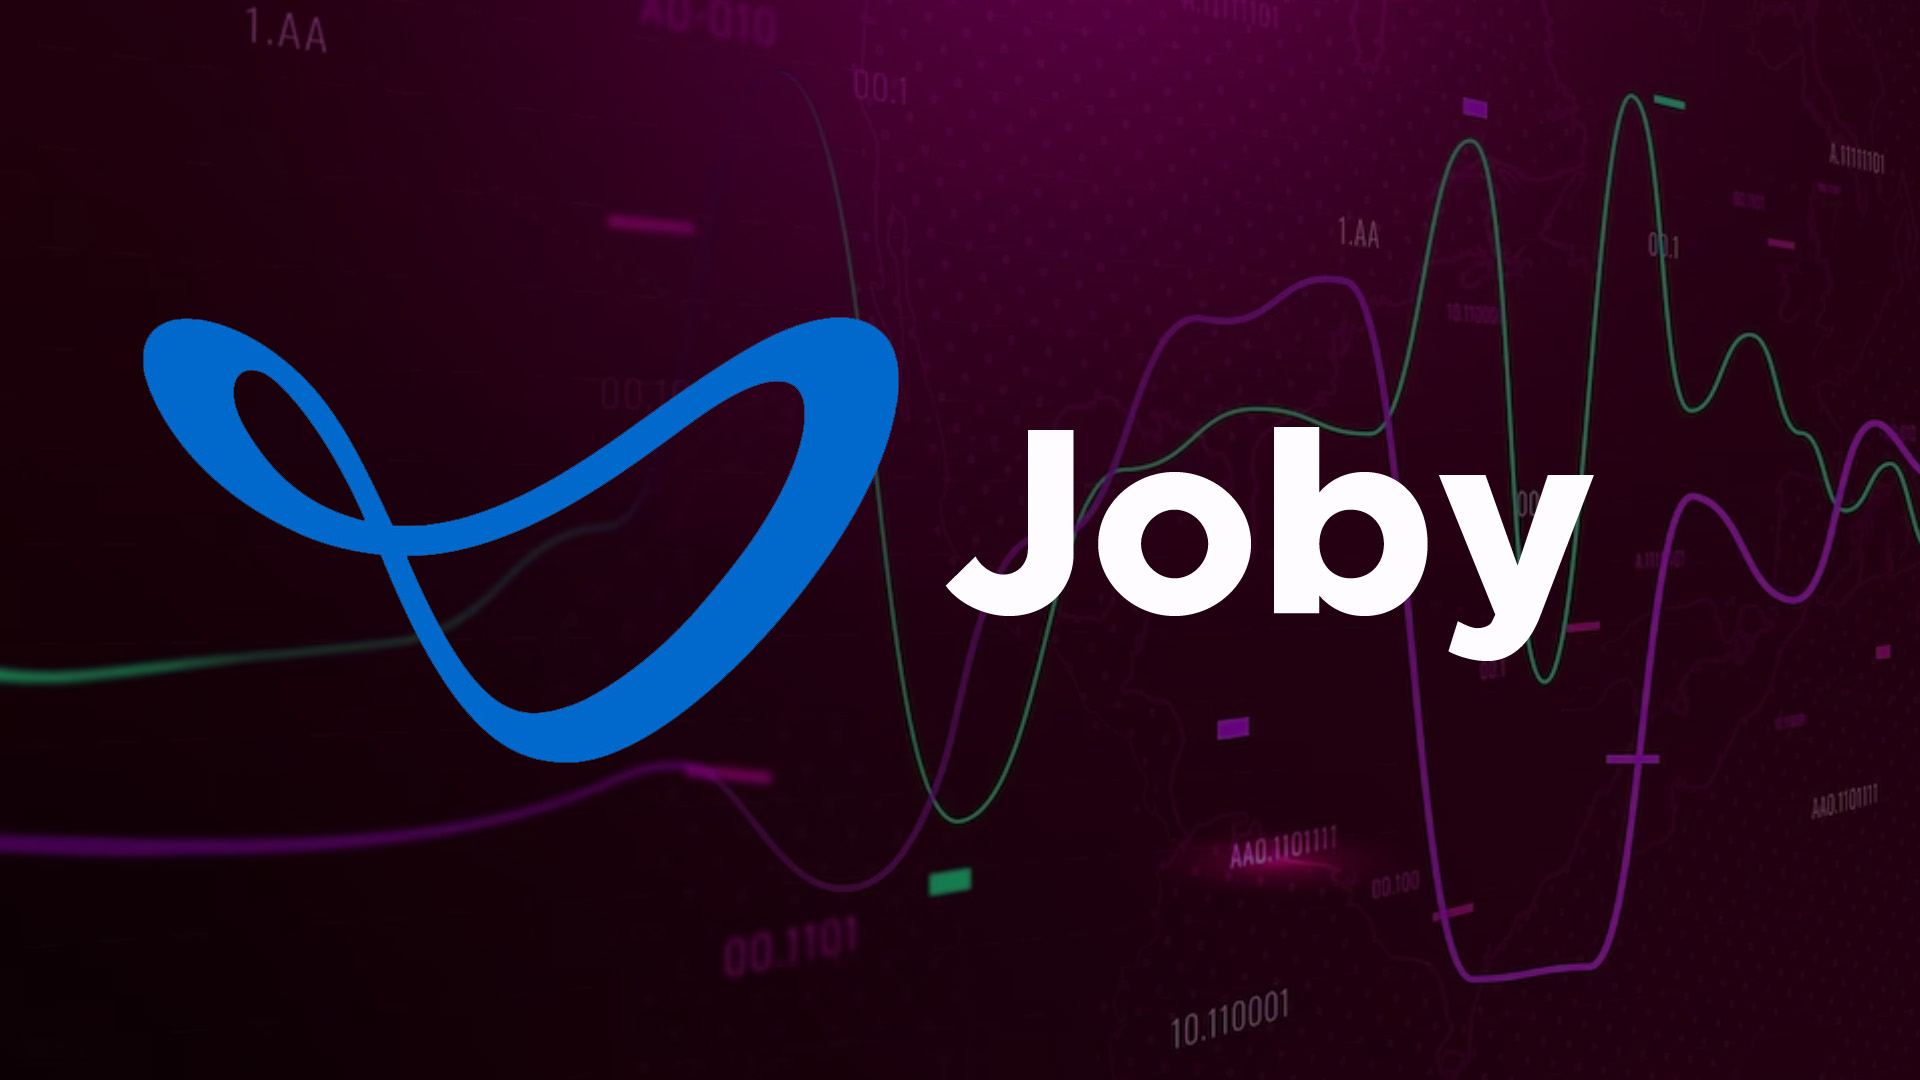 Joby Aviation: JOBY Stock price fell 7% after the massive rally 